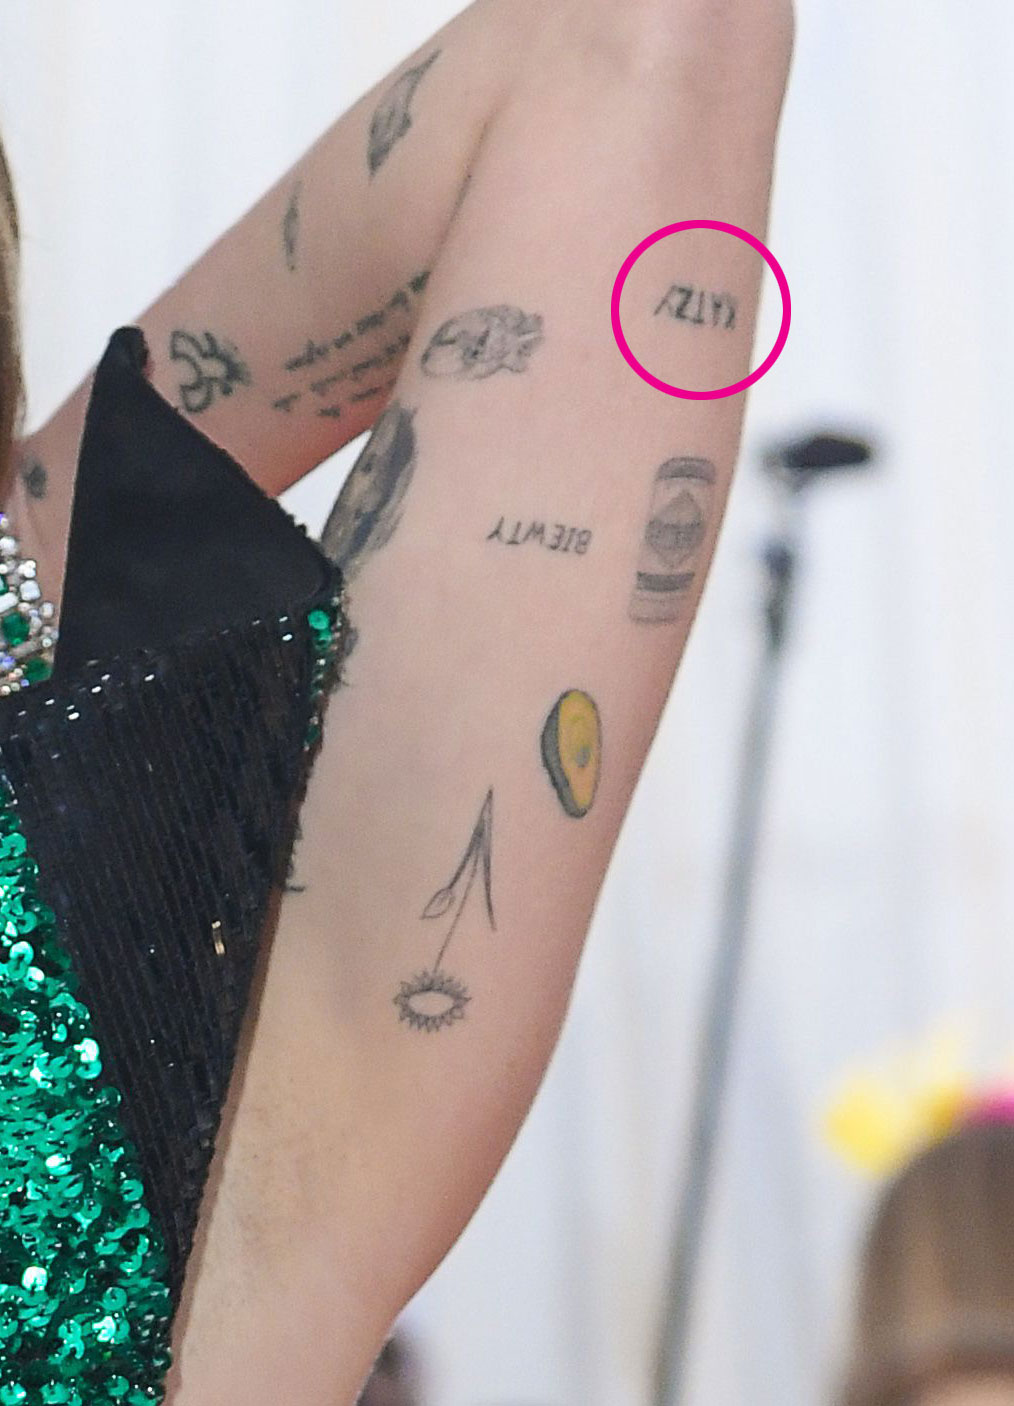 Miley Cyrus' 74 Tattoos Ink Designs, Meanings, Photos